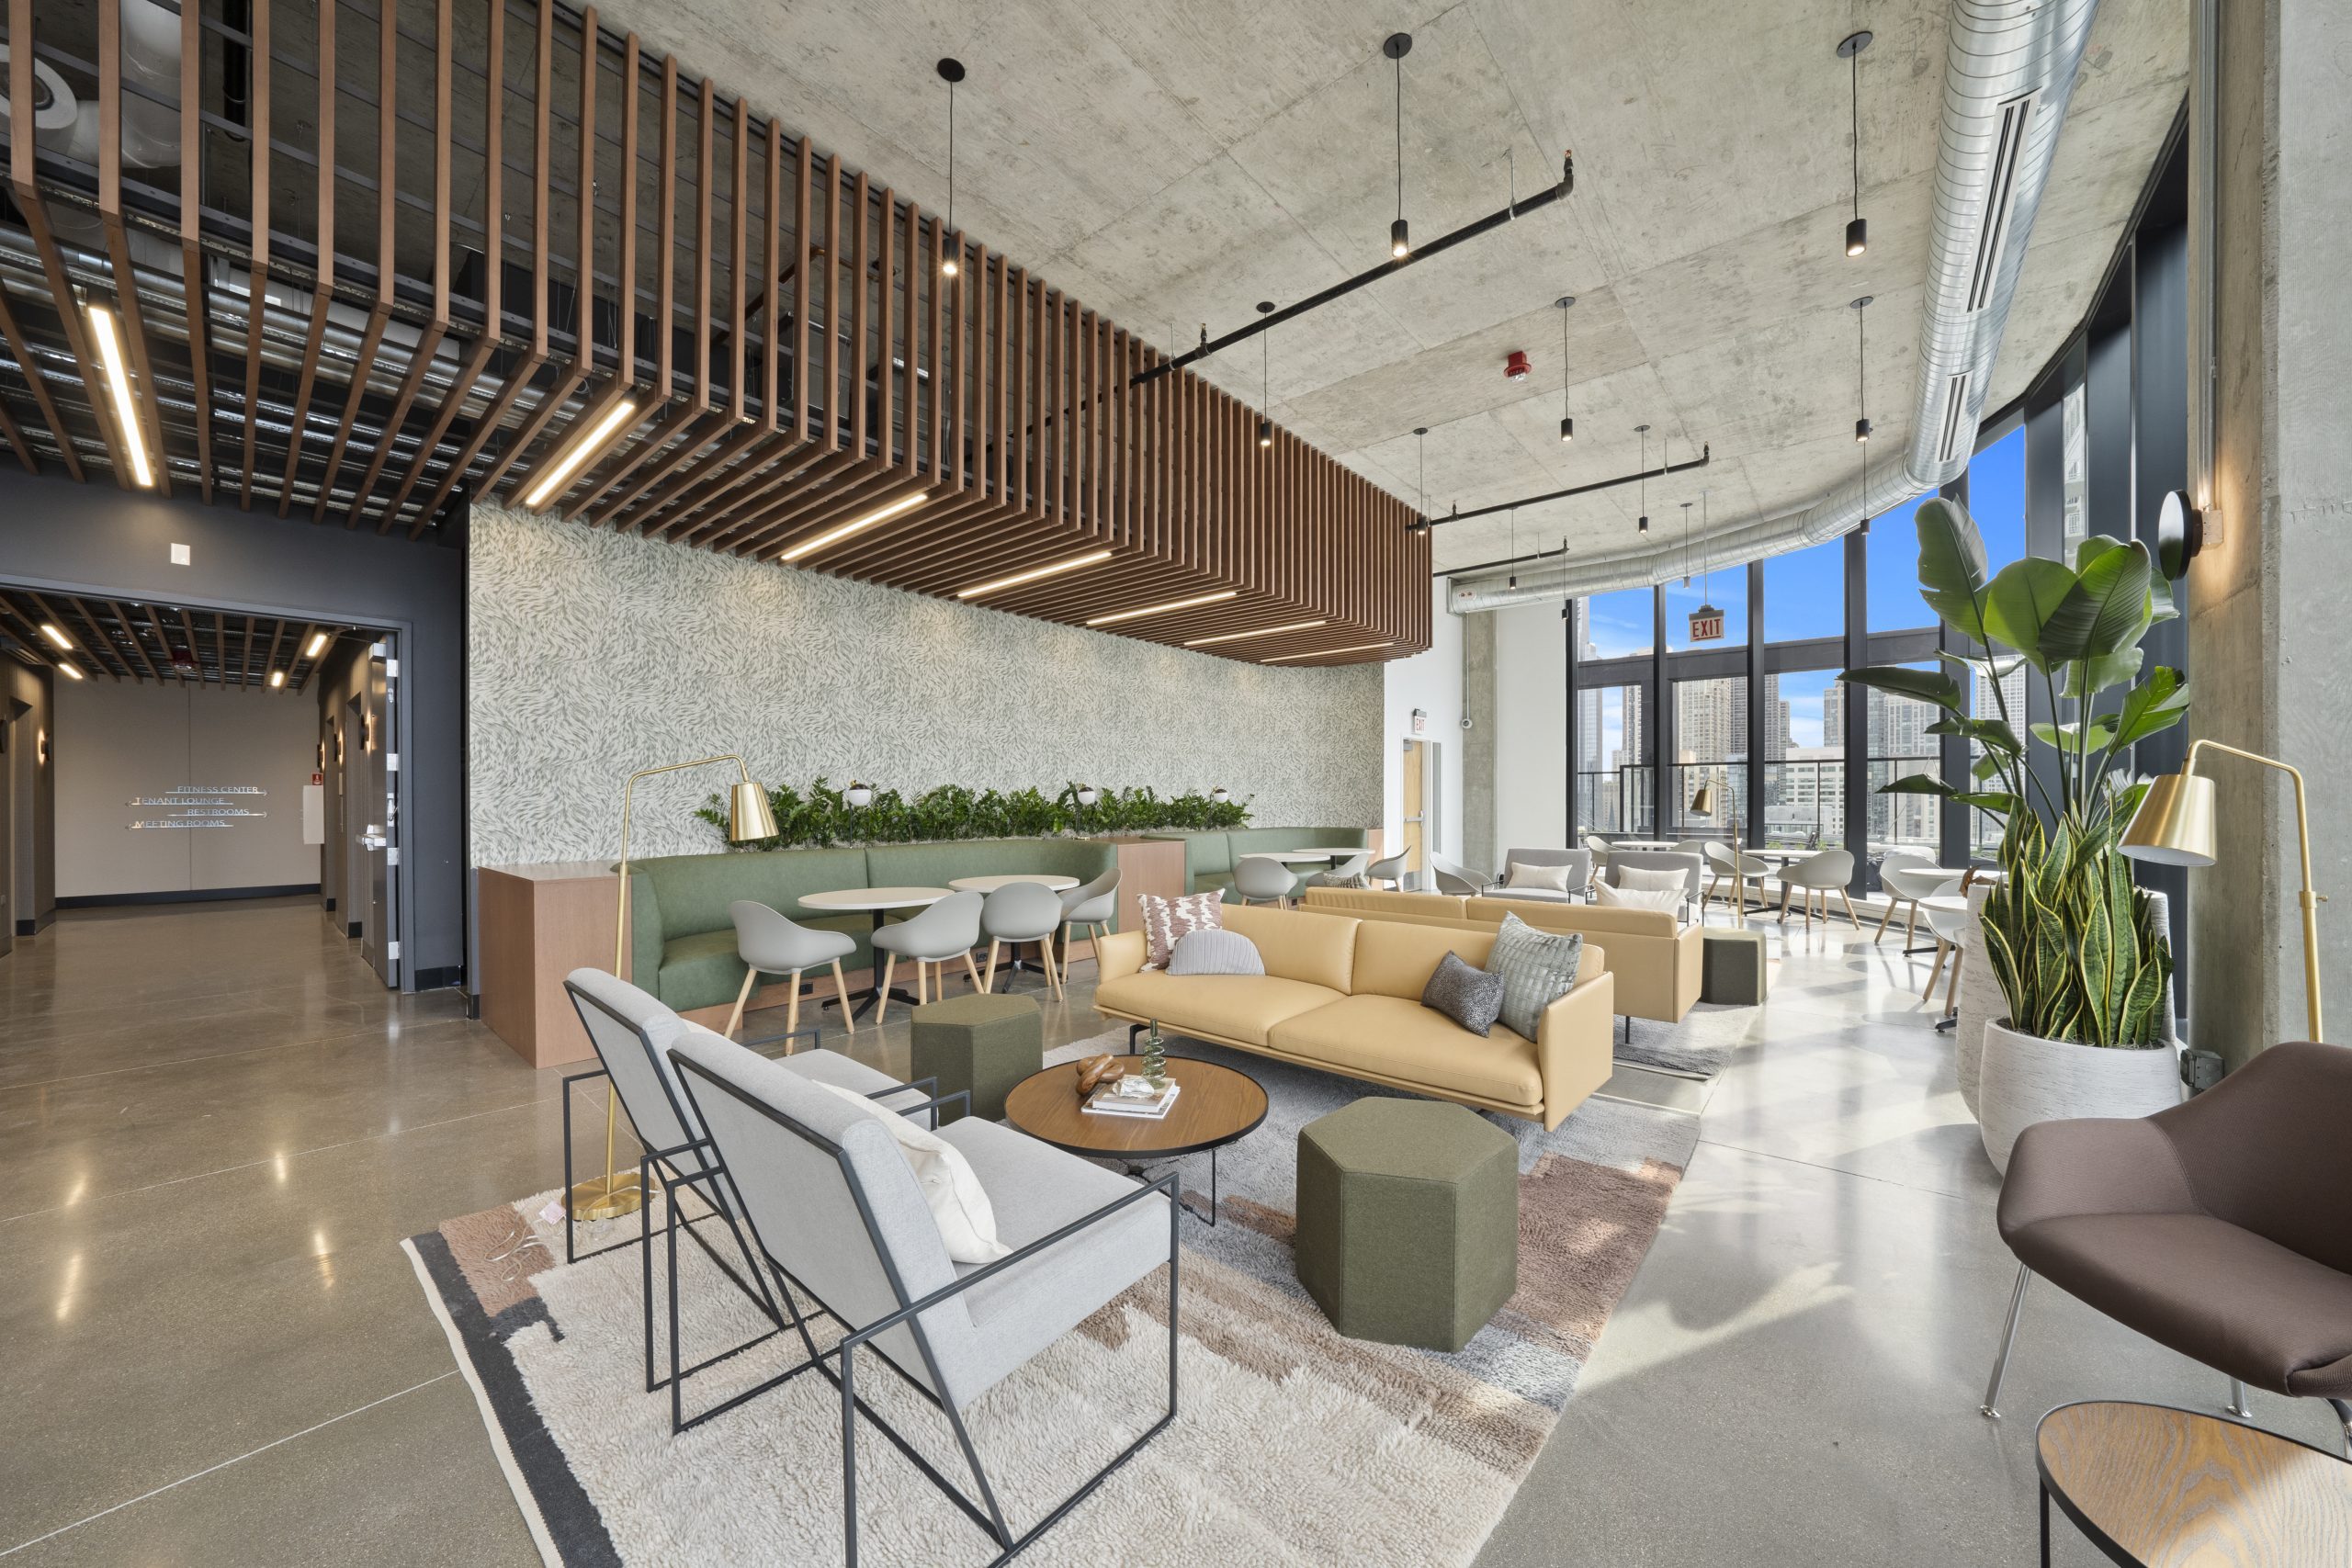 311 W. Huron Building Amenity Rooftop Lounge Built by ARCO/Murray